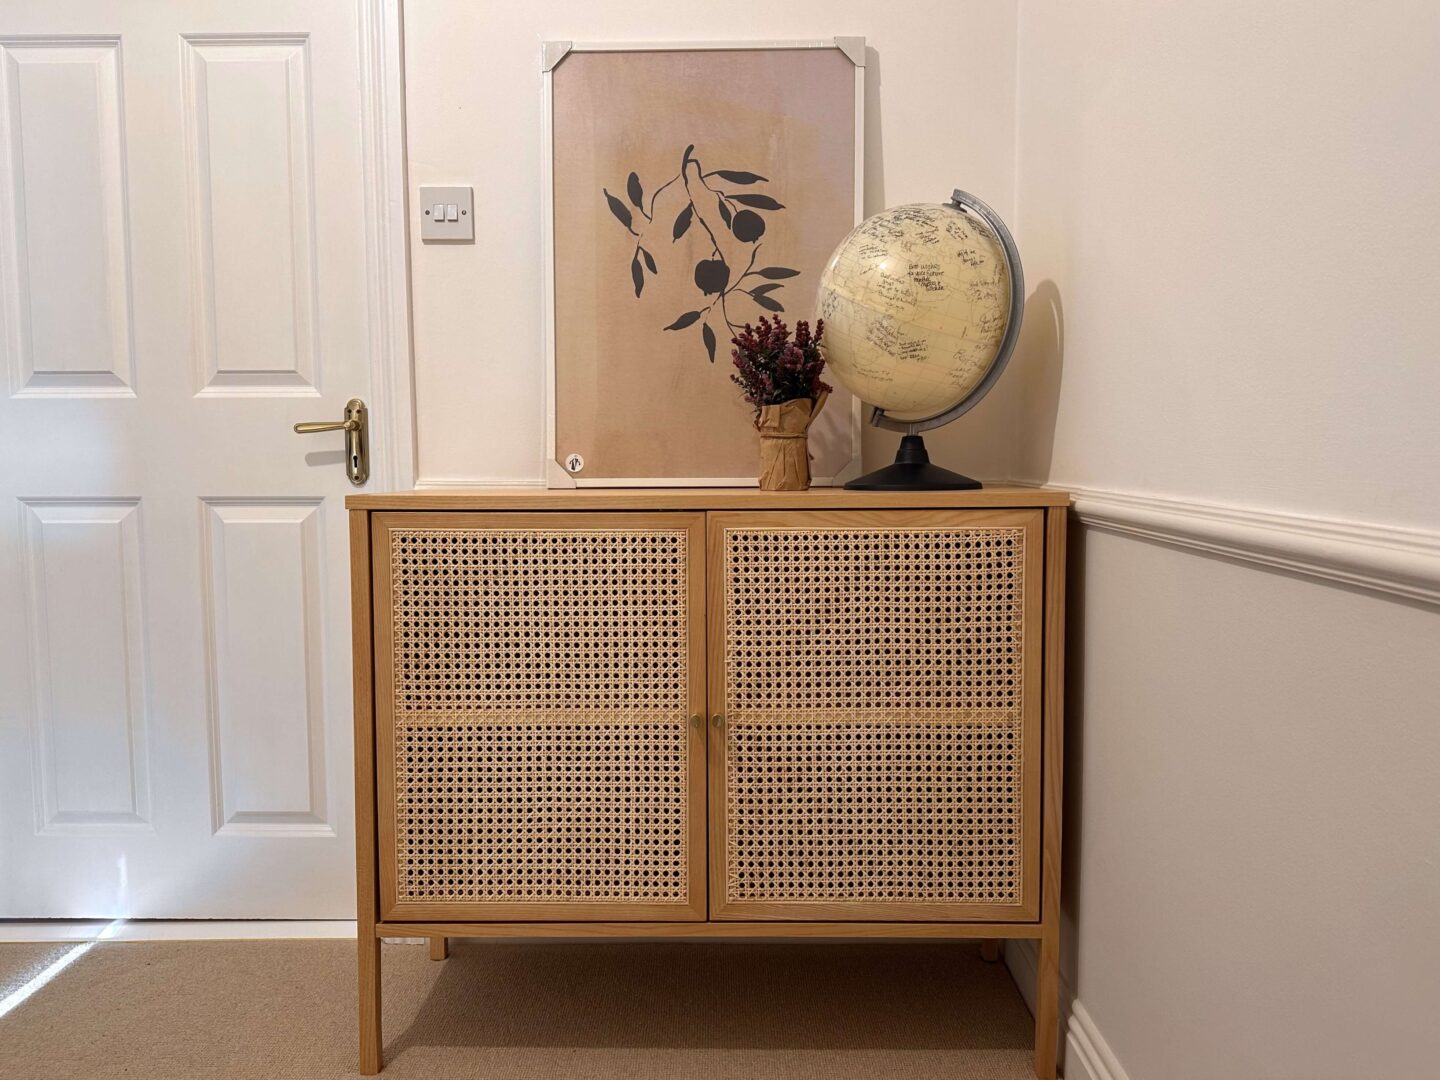 A light coloured wooden cabinet with rattan doors. A white and grey globe sits on top. 